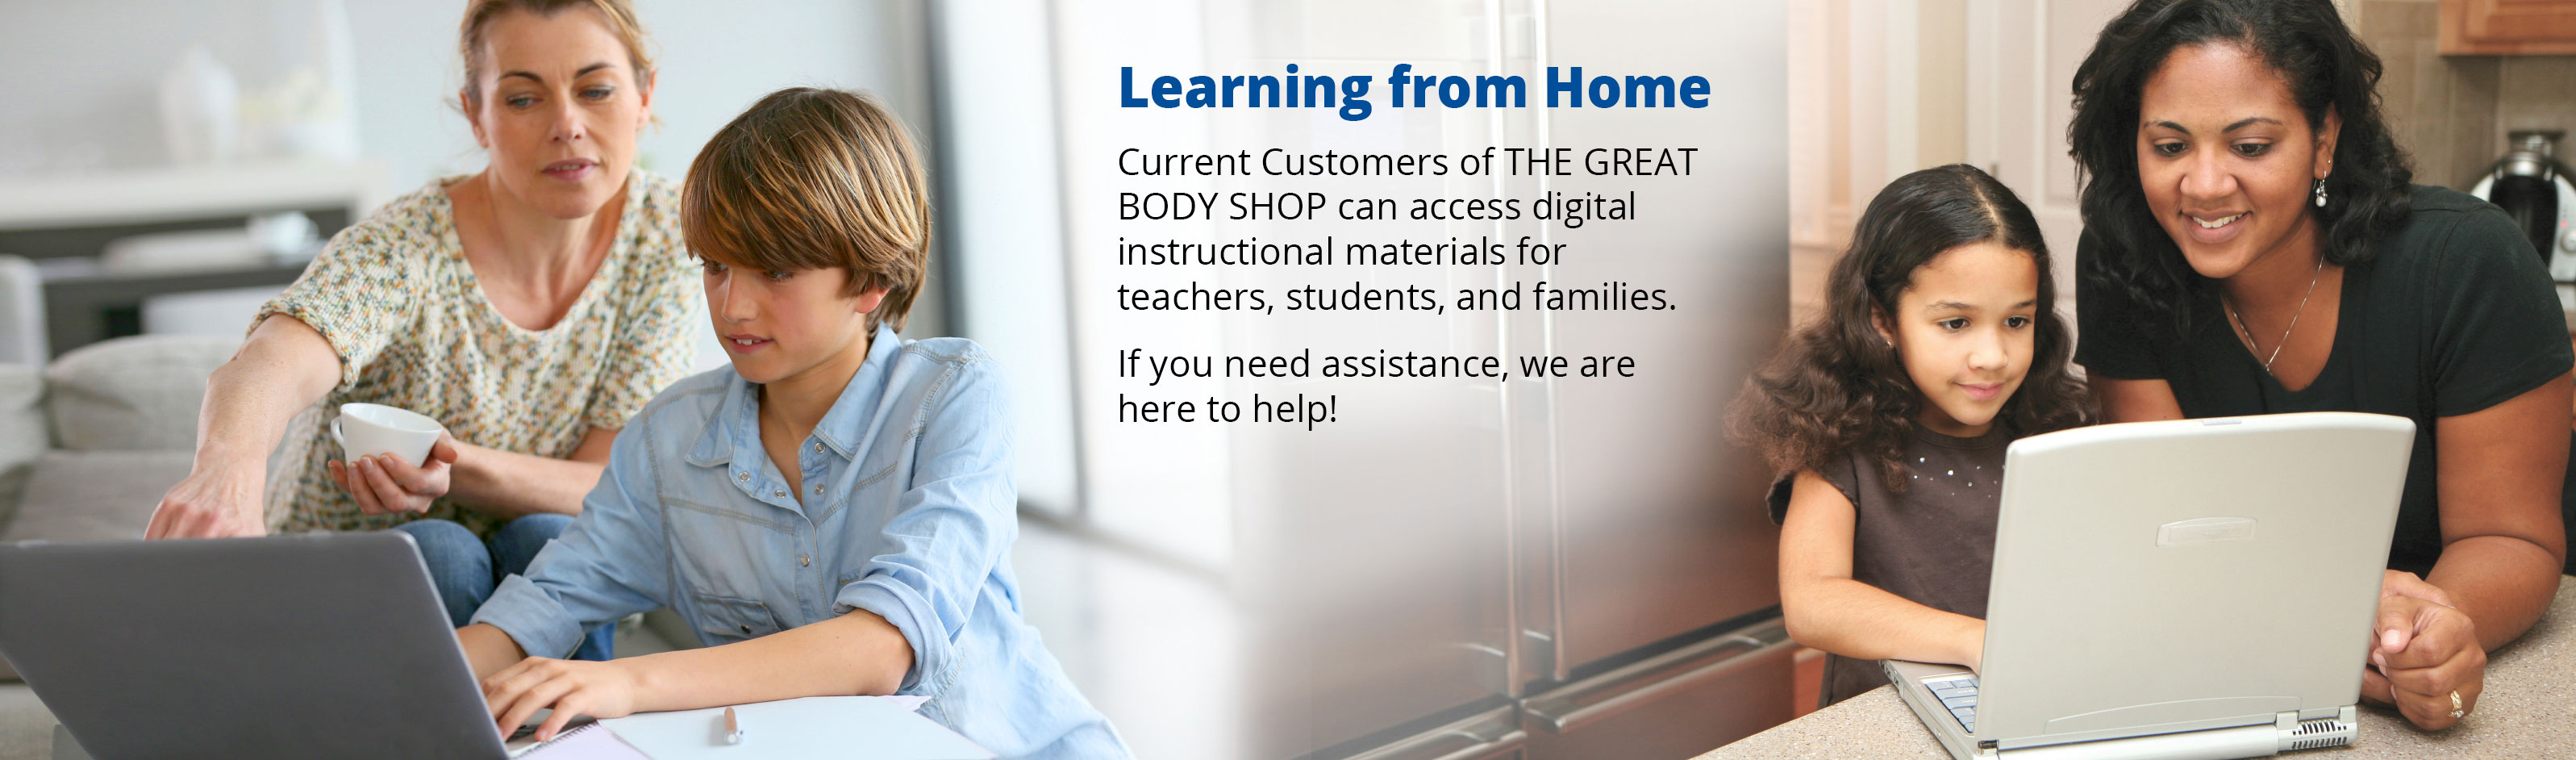 Learning from Home: Current Customers of THE GREAT BODY SHOP can access digital instructional materials for teachers, students, and families. If you need assistance, we are here to help!